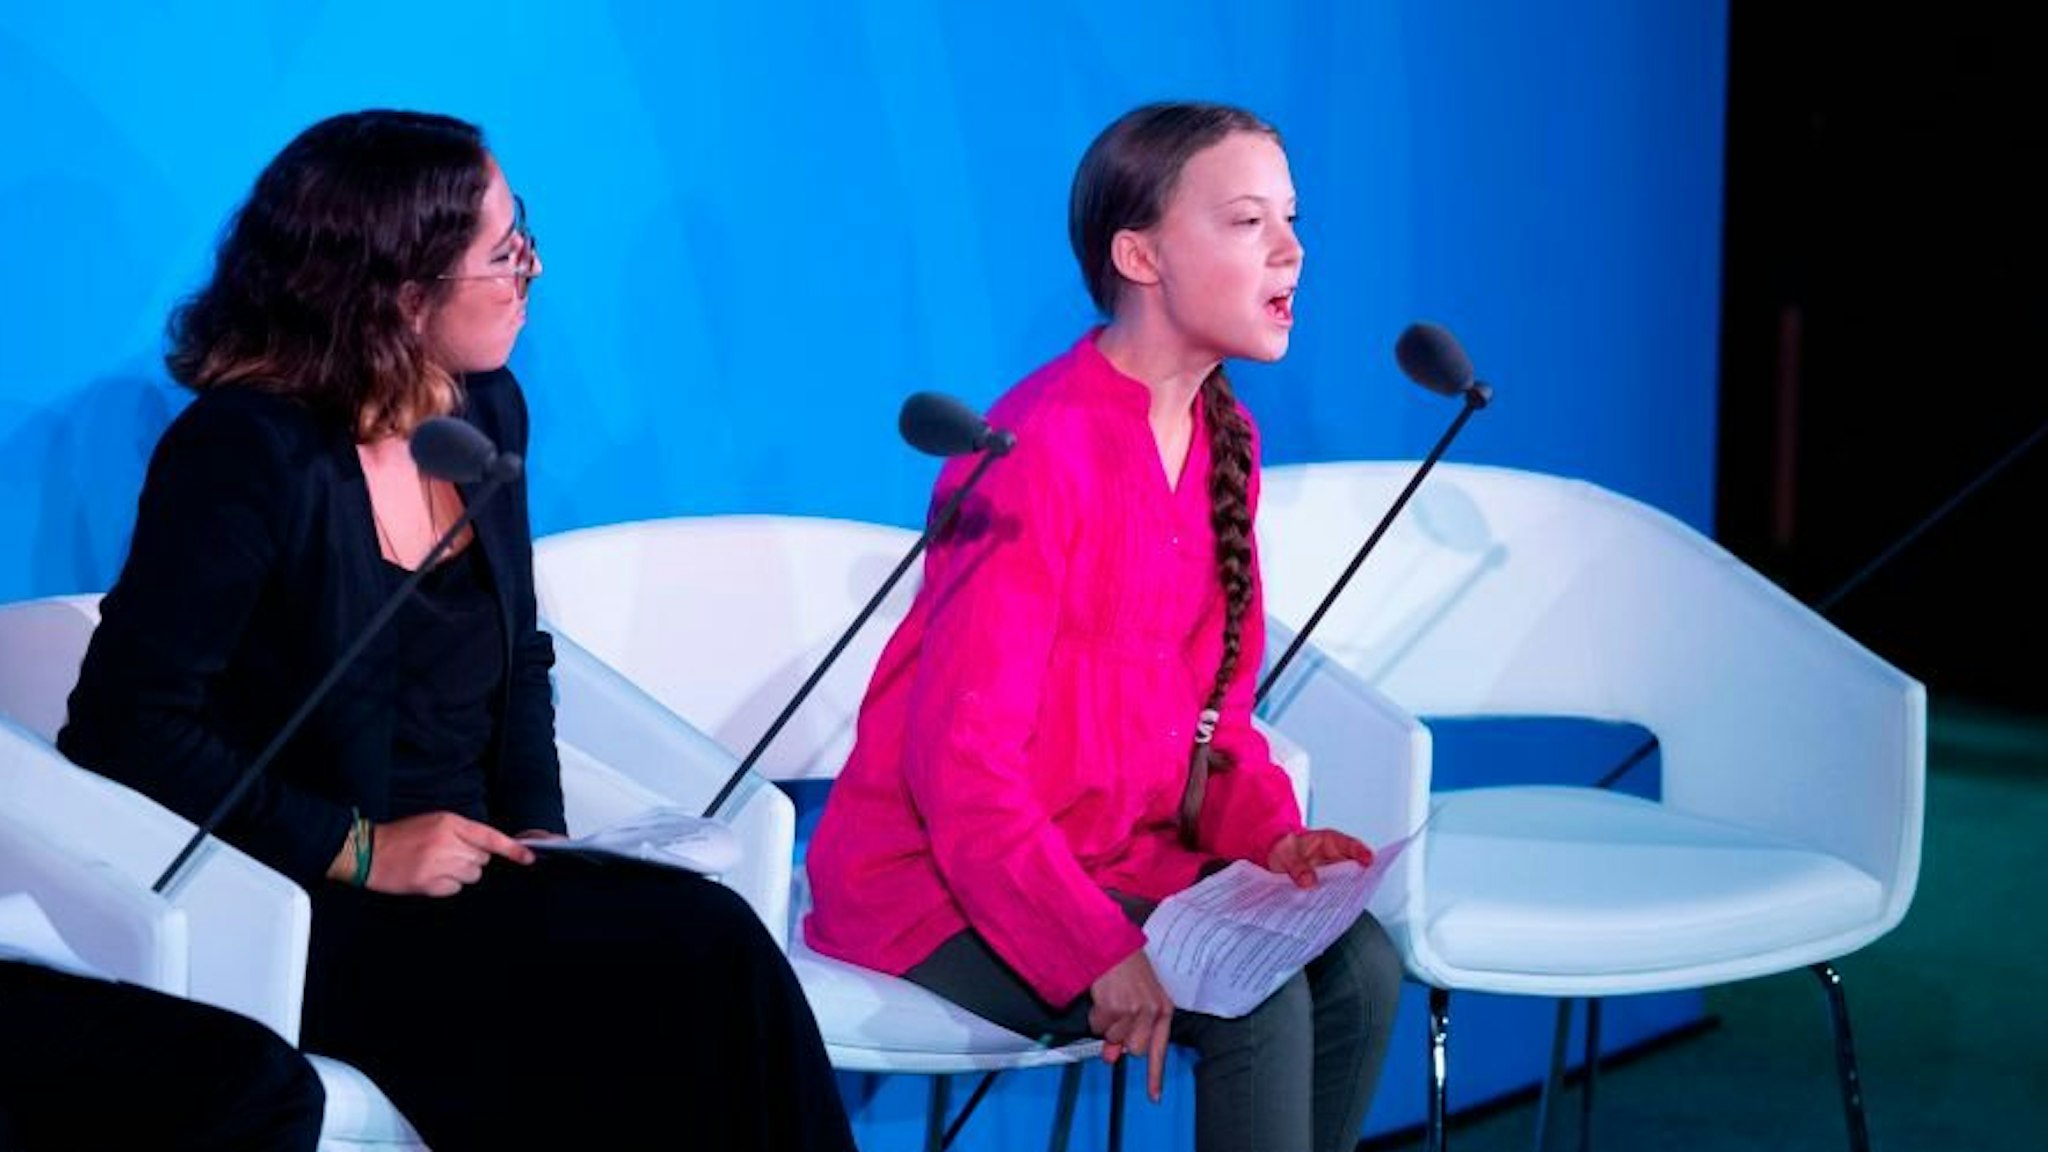 Youth Climate activist Greta Thunberg speaks next to Paloma Costa during the UN Climate Action Summit on September 23, 2019 at the United Nations Headquarters in New York City.